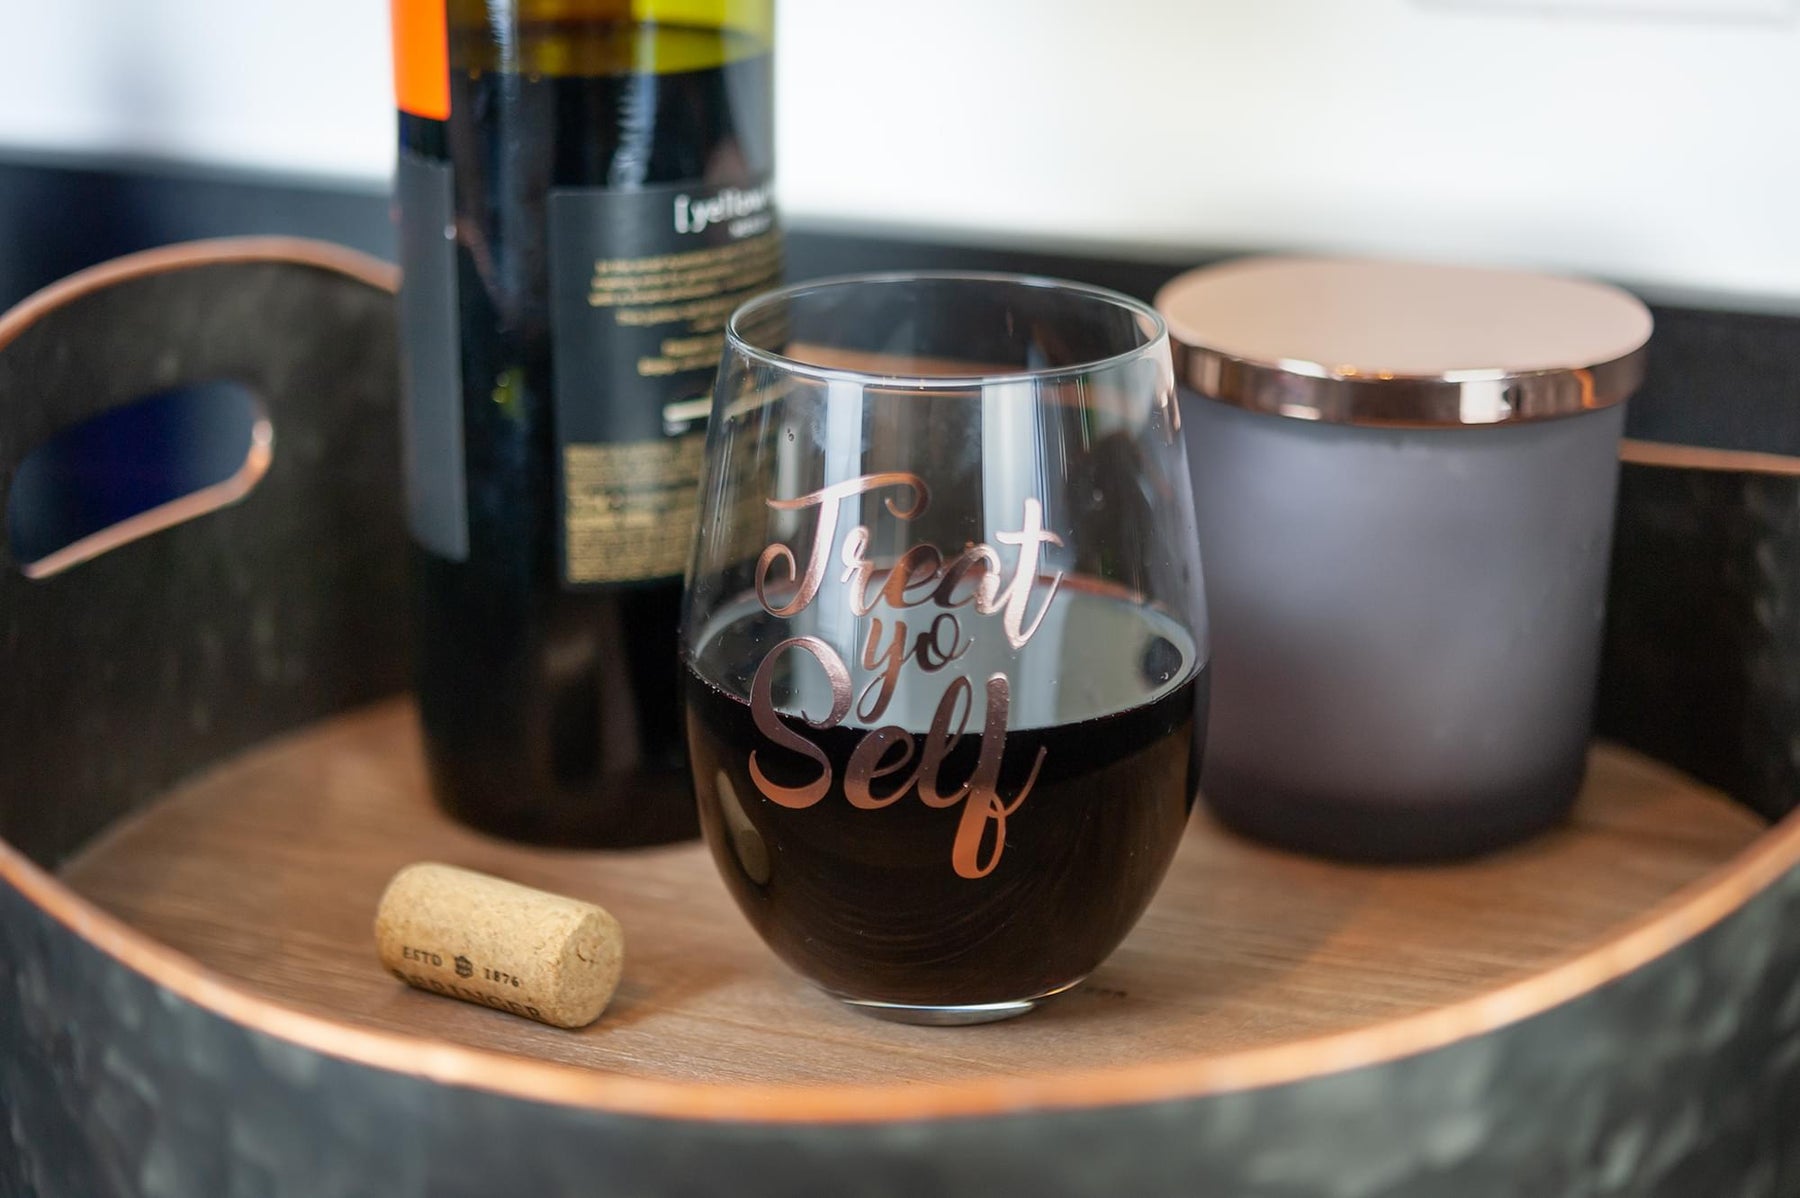 Parks and Recreation Treat Yo Self Stemless Wine Glass | Pink